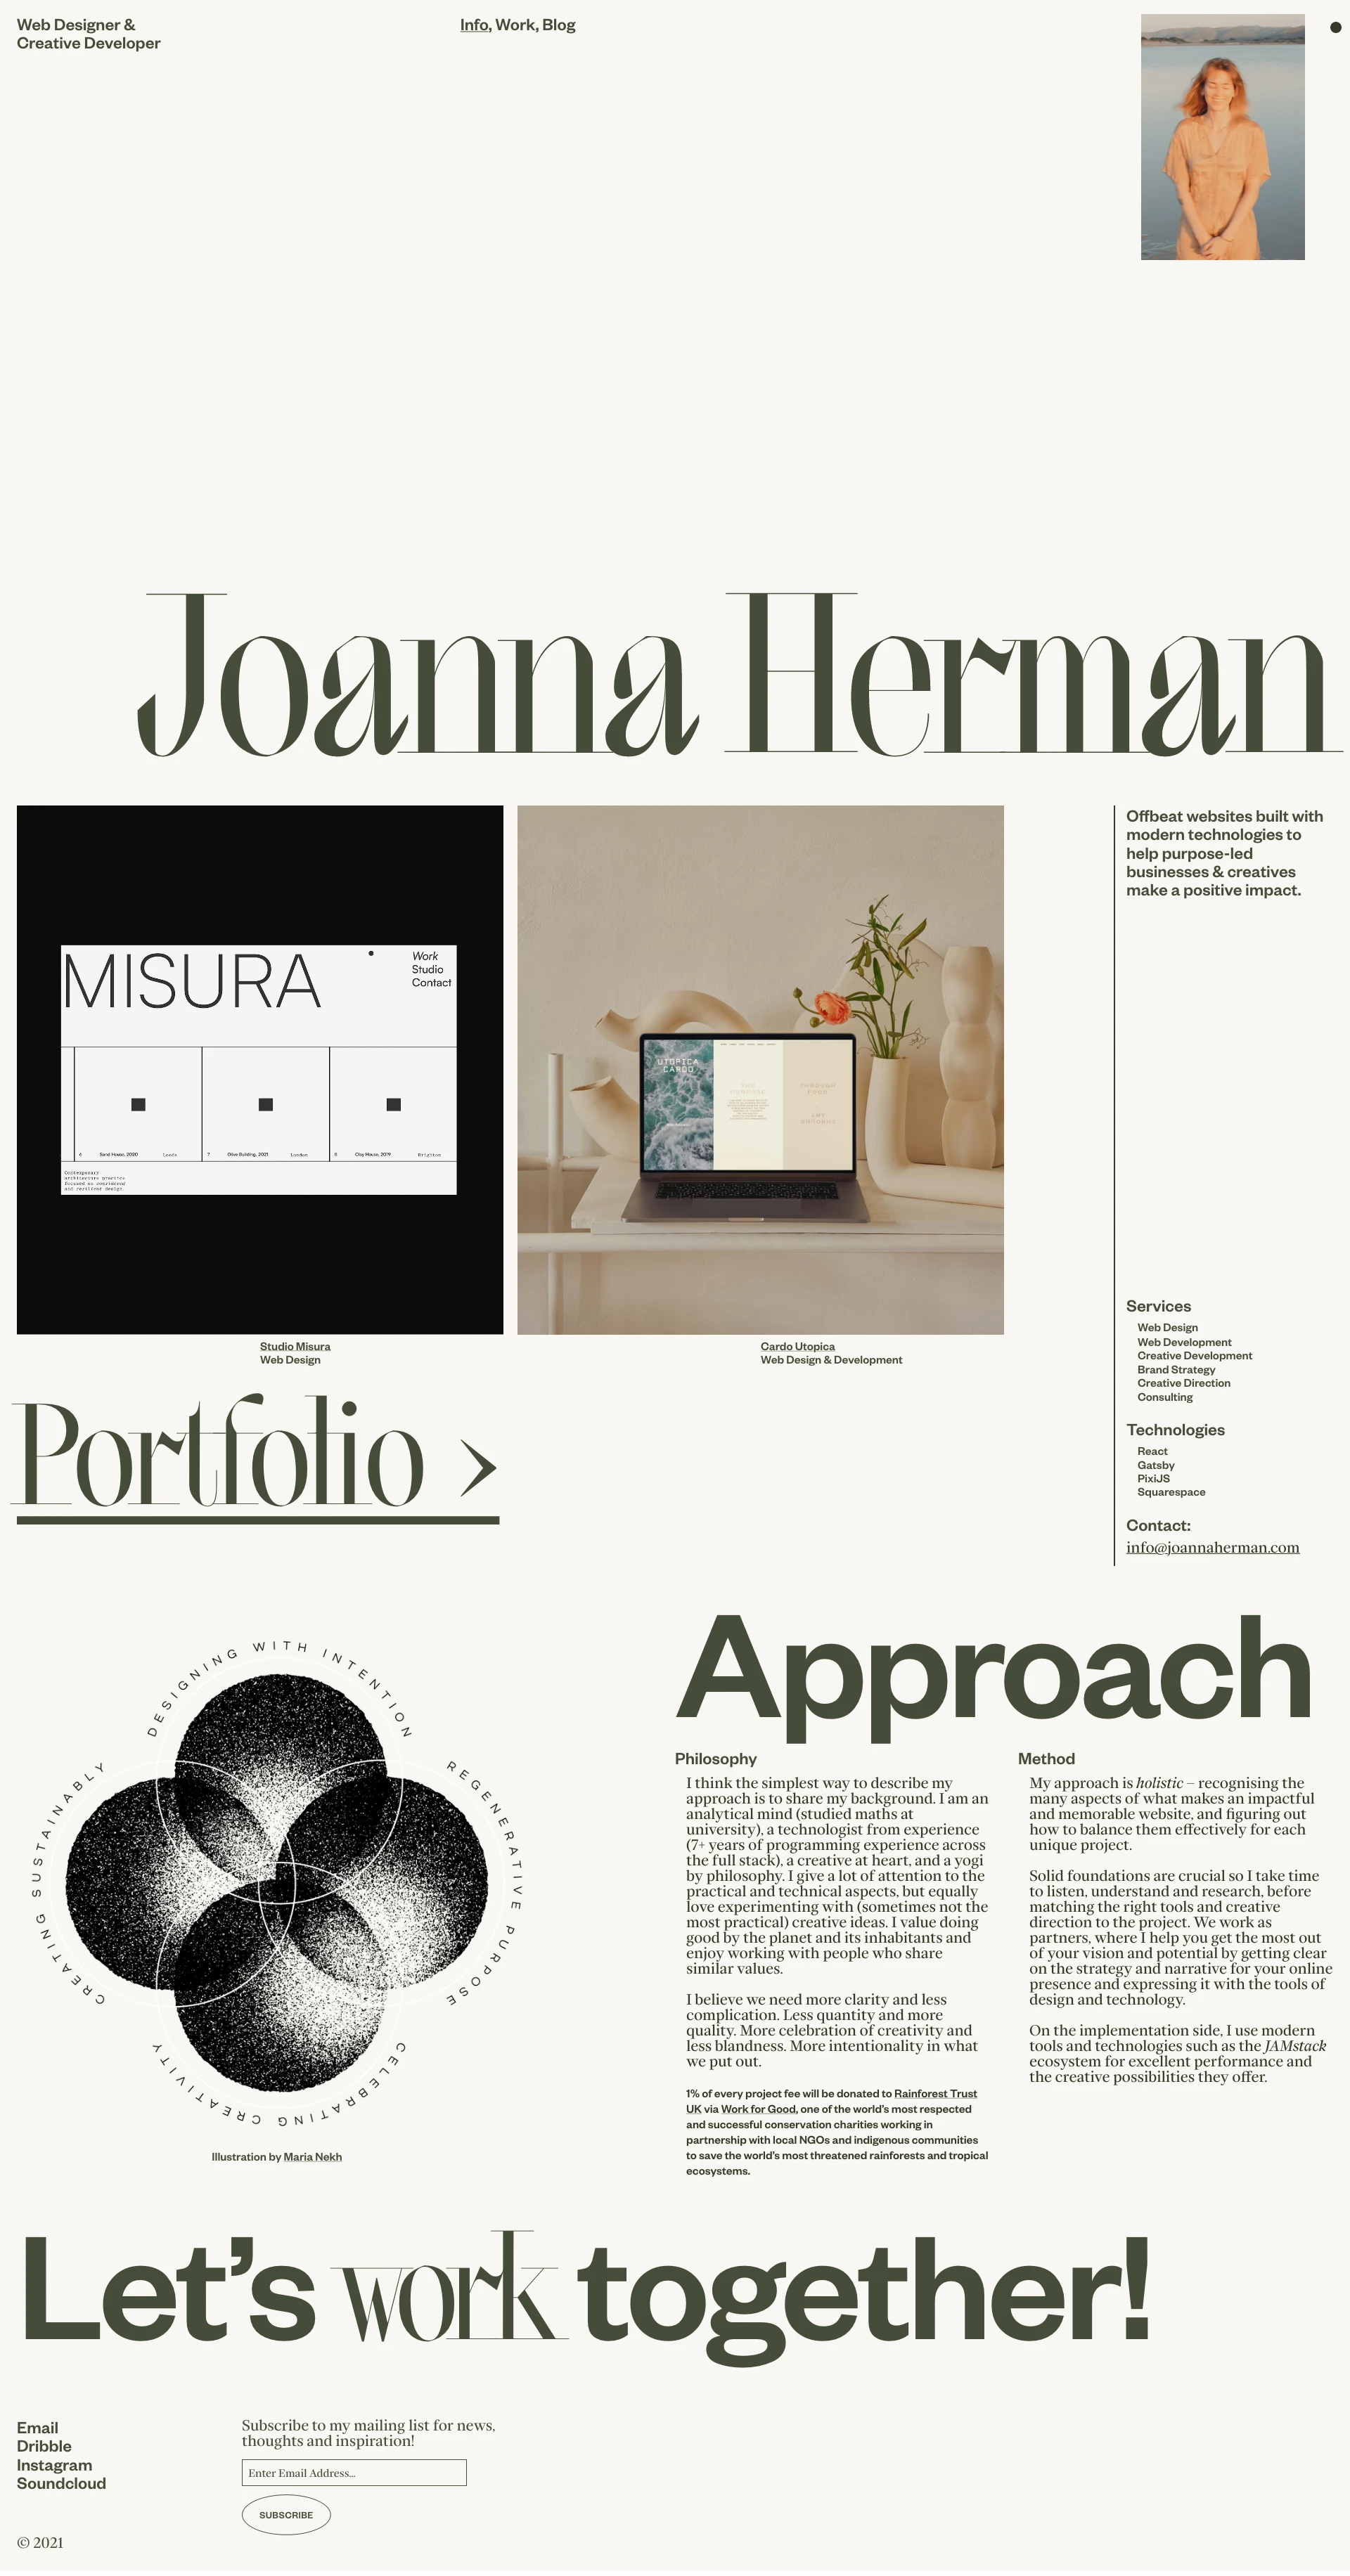 Joanna Herman Landing Page Example: I believe we need more clarity and less complication. Less quantity and more quality. More celebration of creativity and less blandness. More intentionality in what we put out.